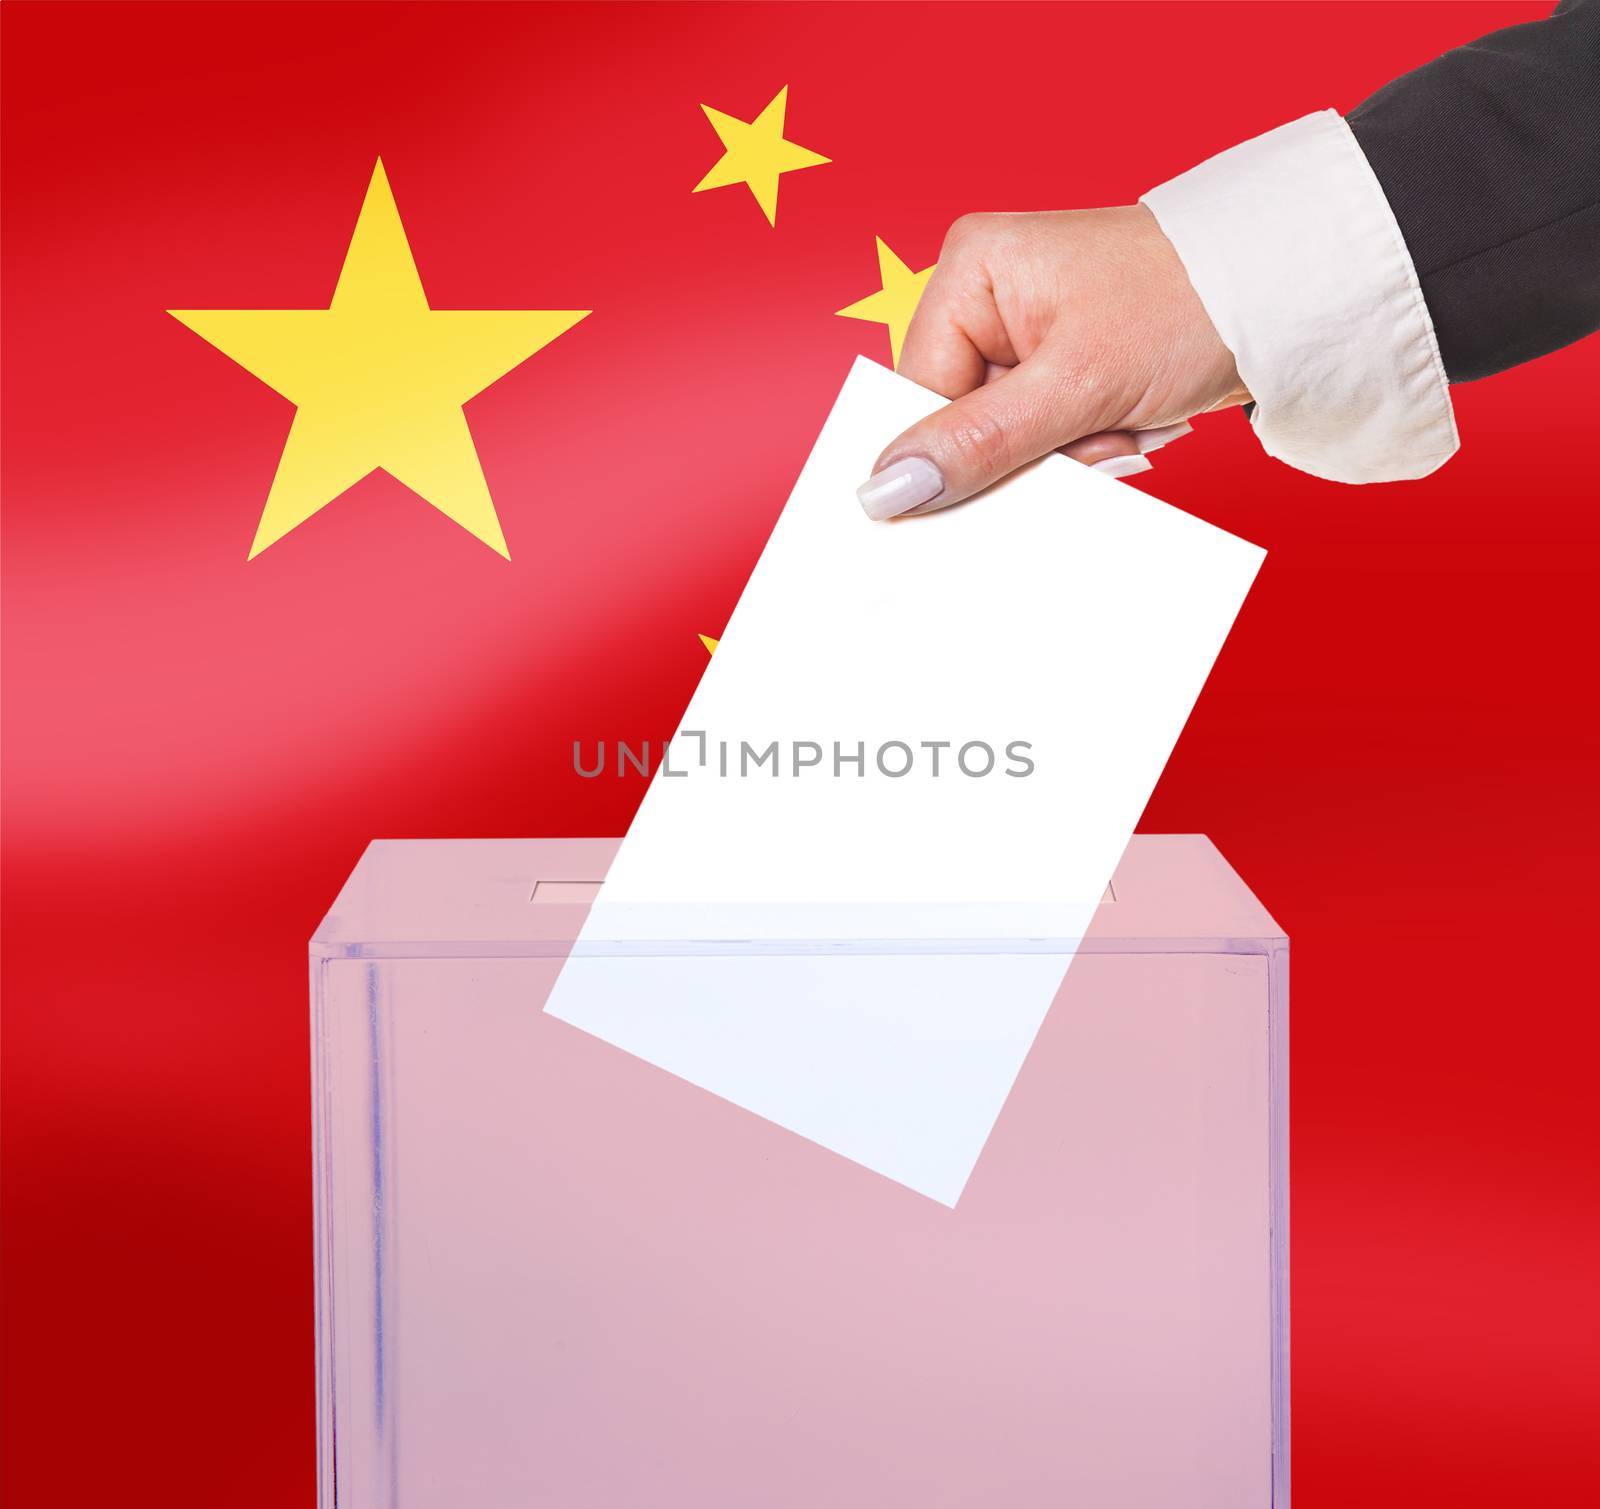 electoral vote by ballot, under the China flag